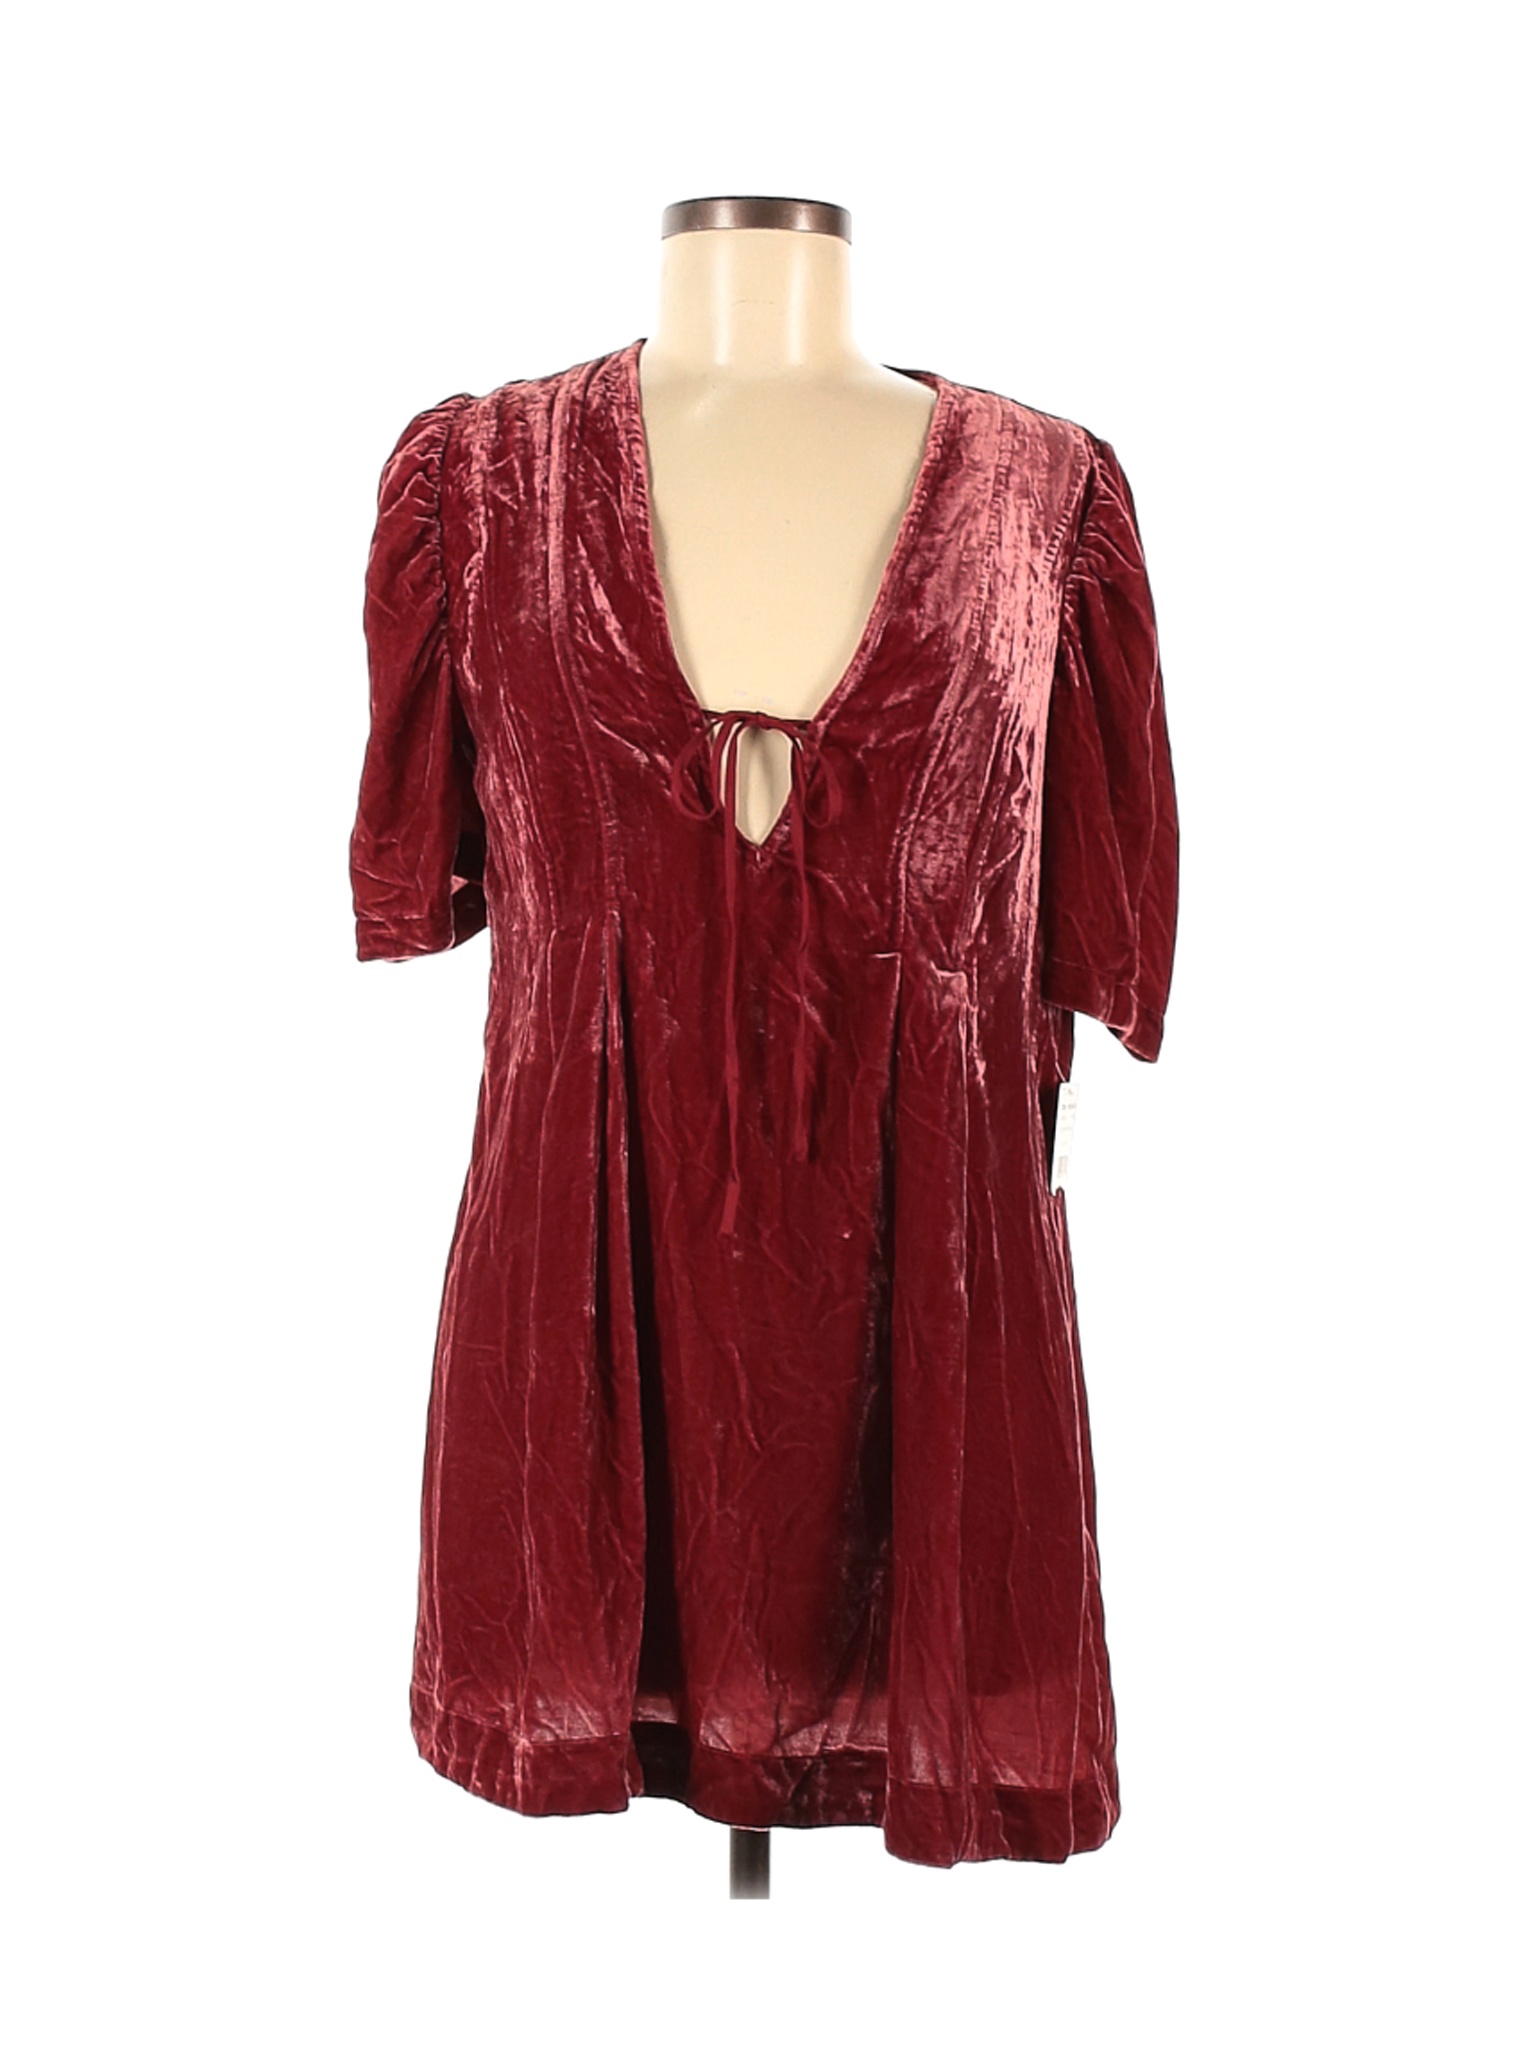 free people red dress